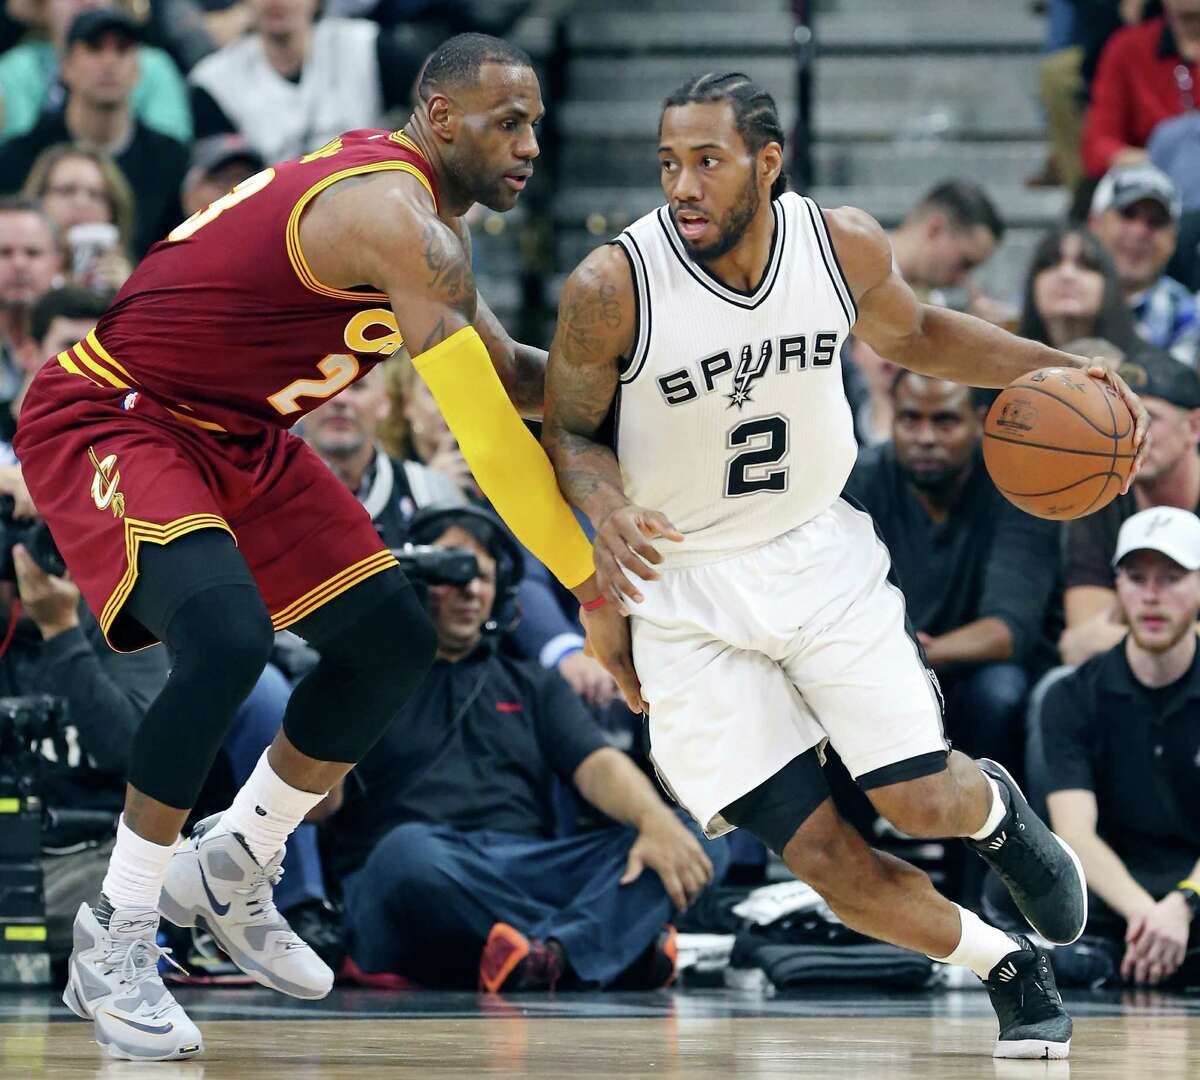 San Antonio Spurs' Kawhi Leonard looks for room around Cleveland Cavaliers' LeBron James during first half action Thursday Jan. 14, 2016 at the AT&T Center.